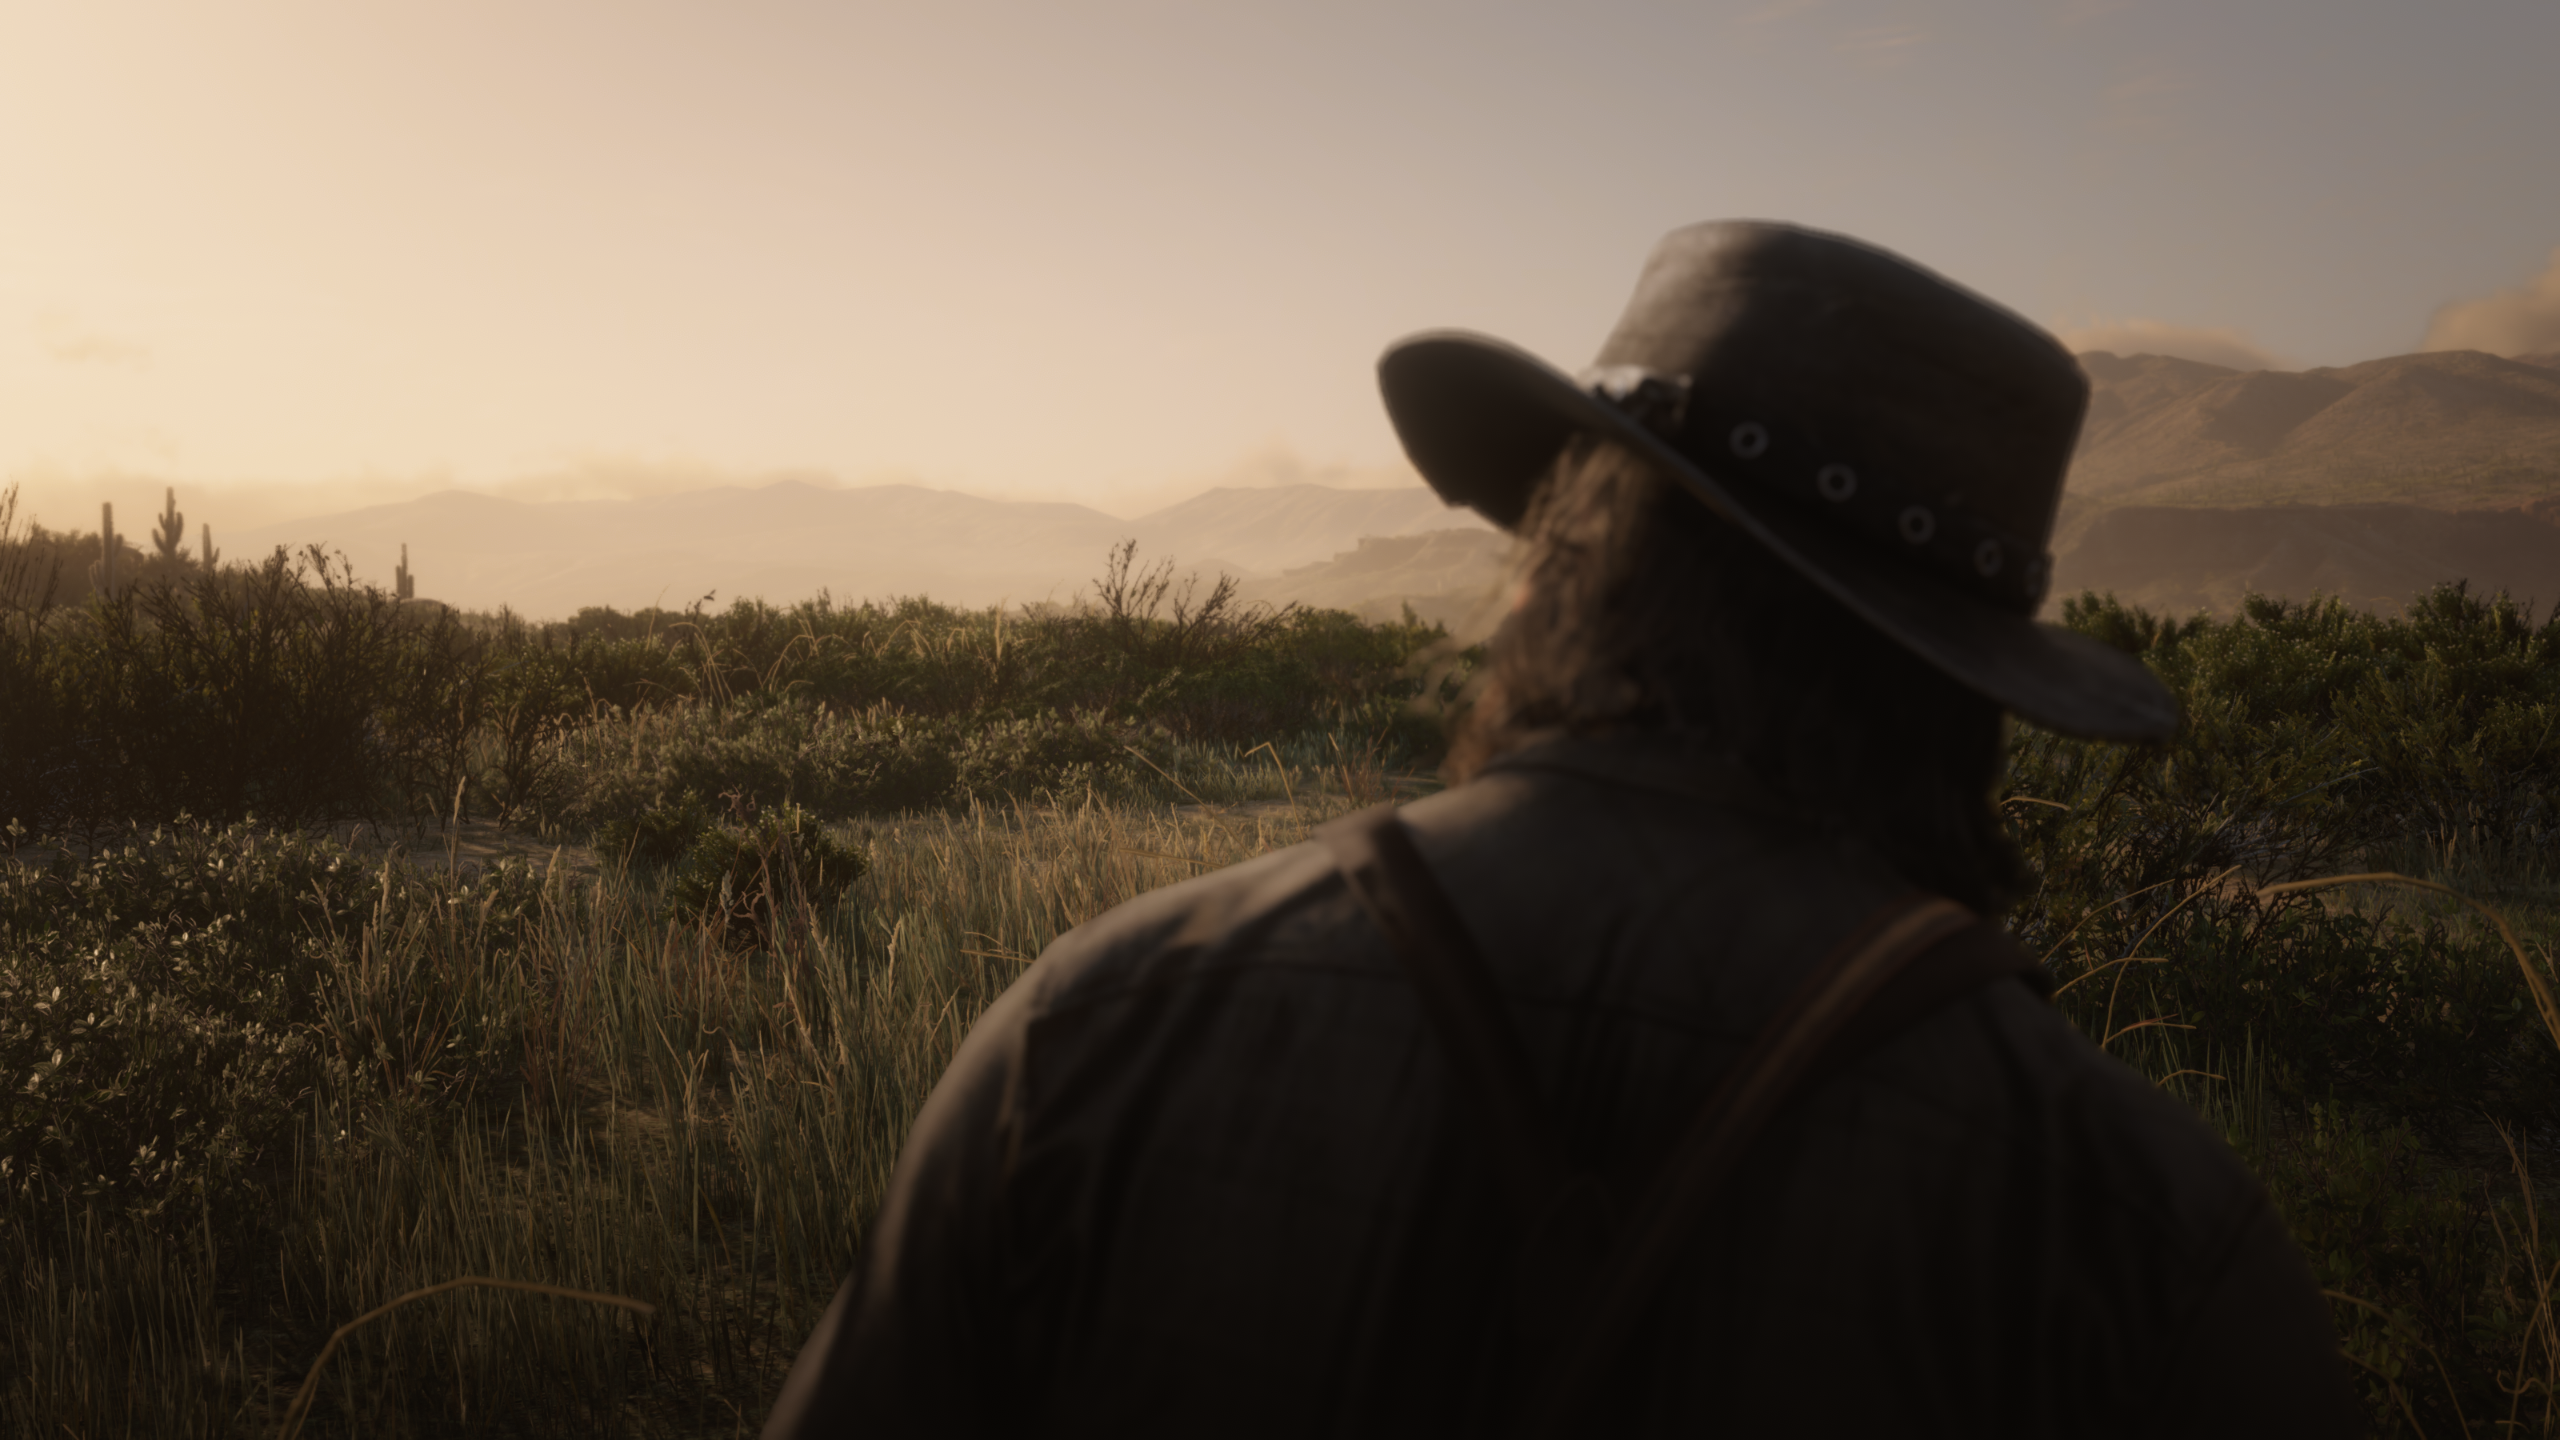 General 2560x1440 Red Dead Redemption 2 John Marston video game characters western sunset nature